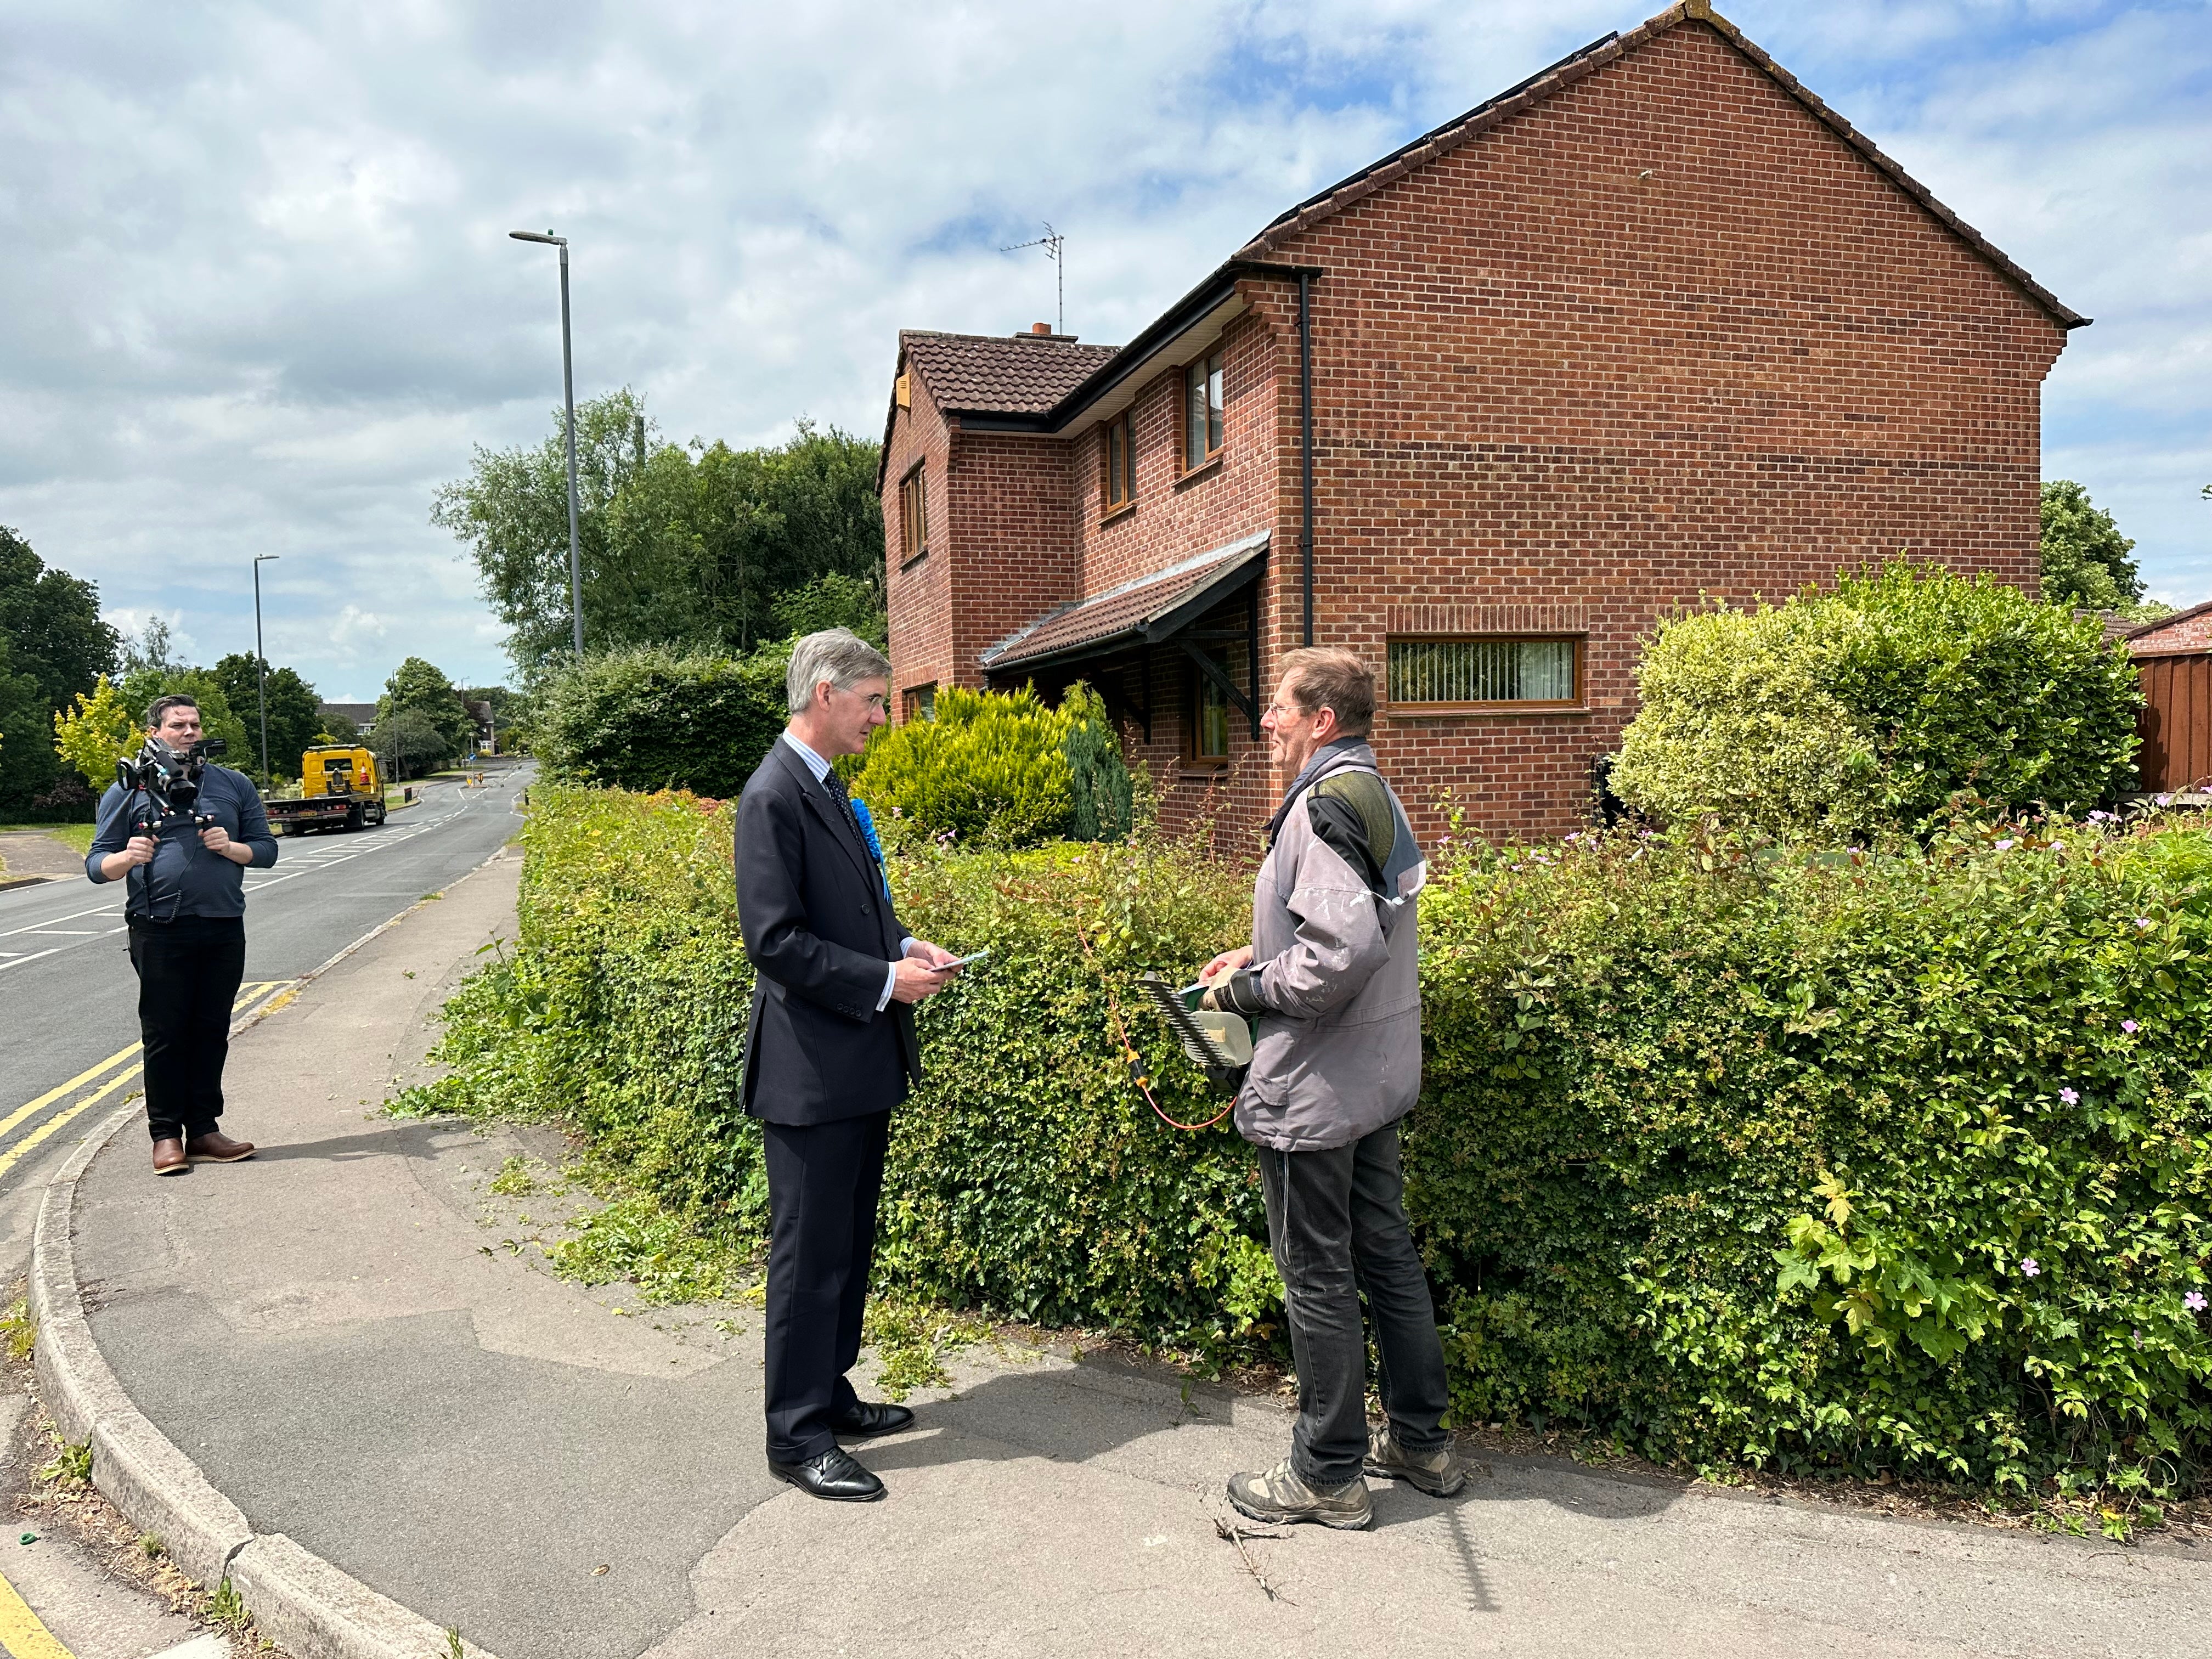 Mark Bray tells Sir Jacob Rees-Mogg he’s undecided on who to vote for. Asked what the big issues are locally, he points toward a 5G mast near his home